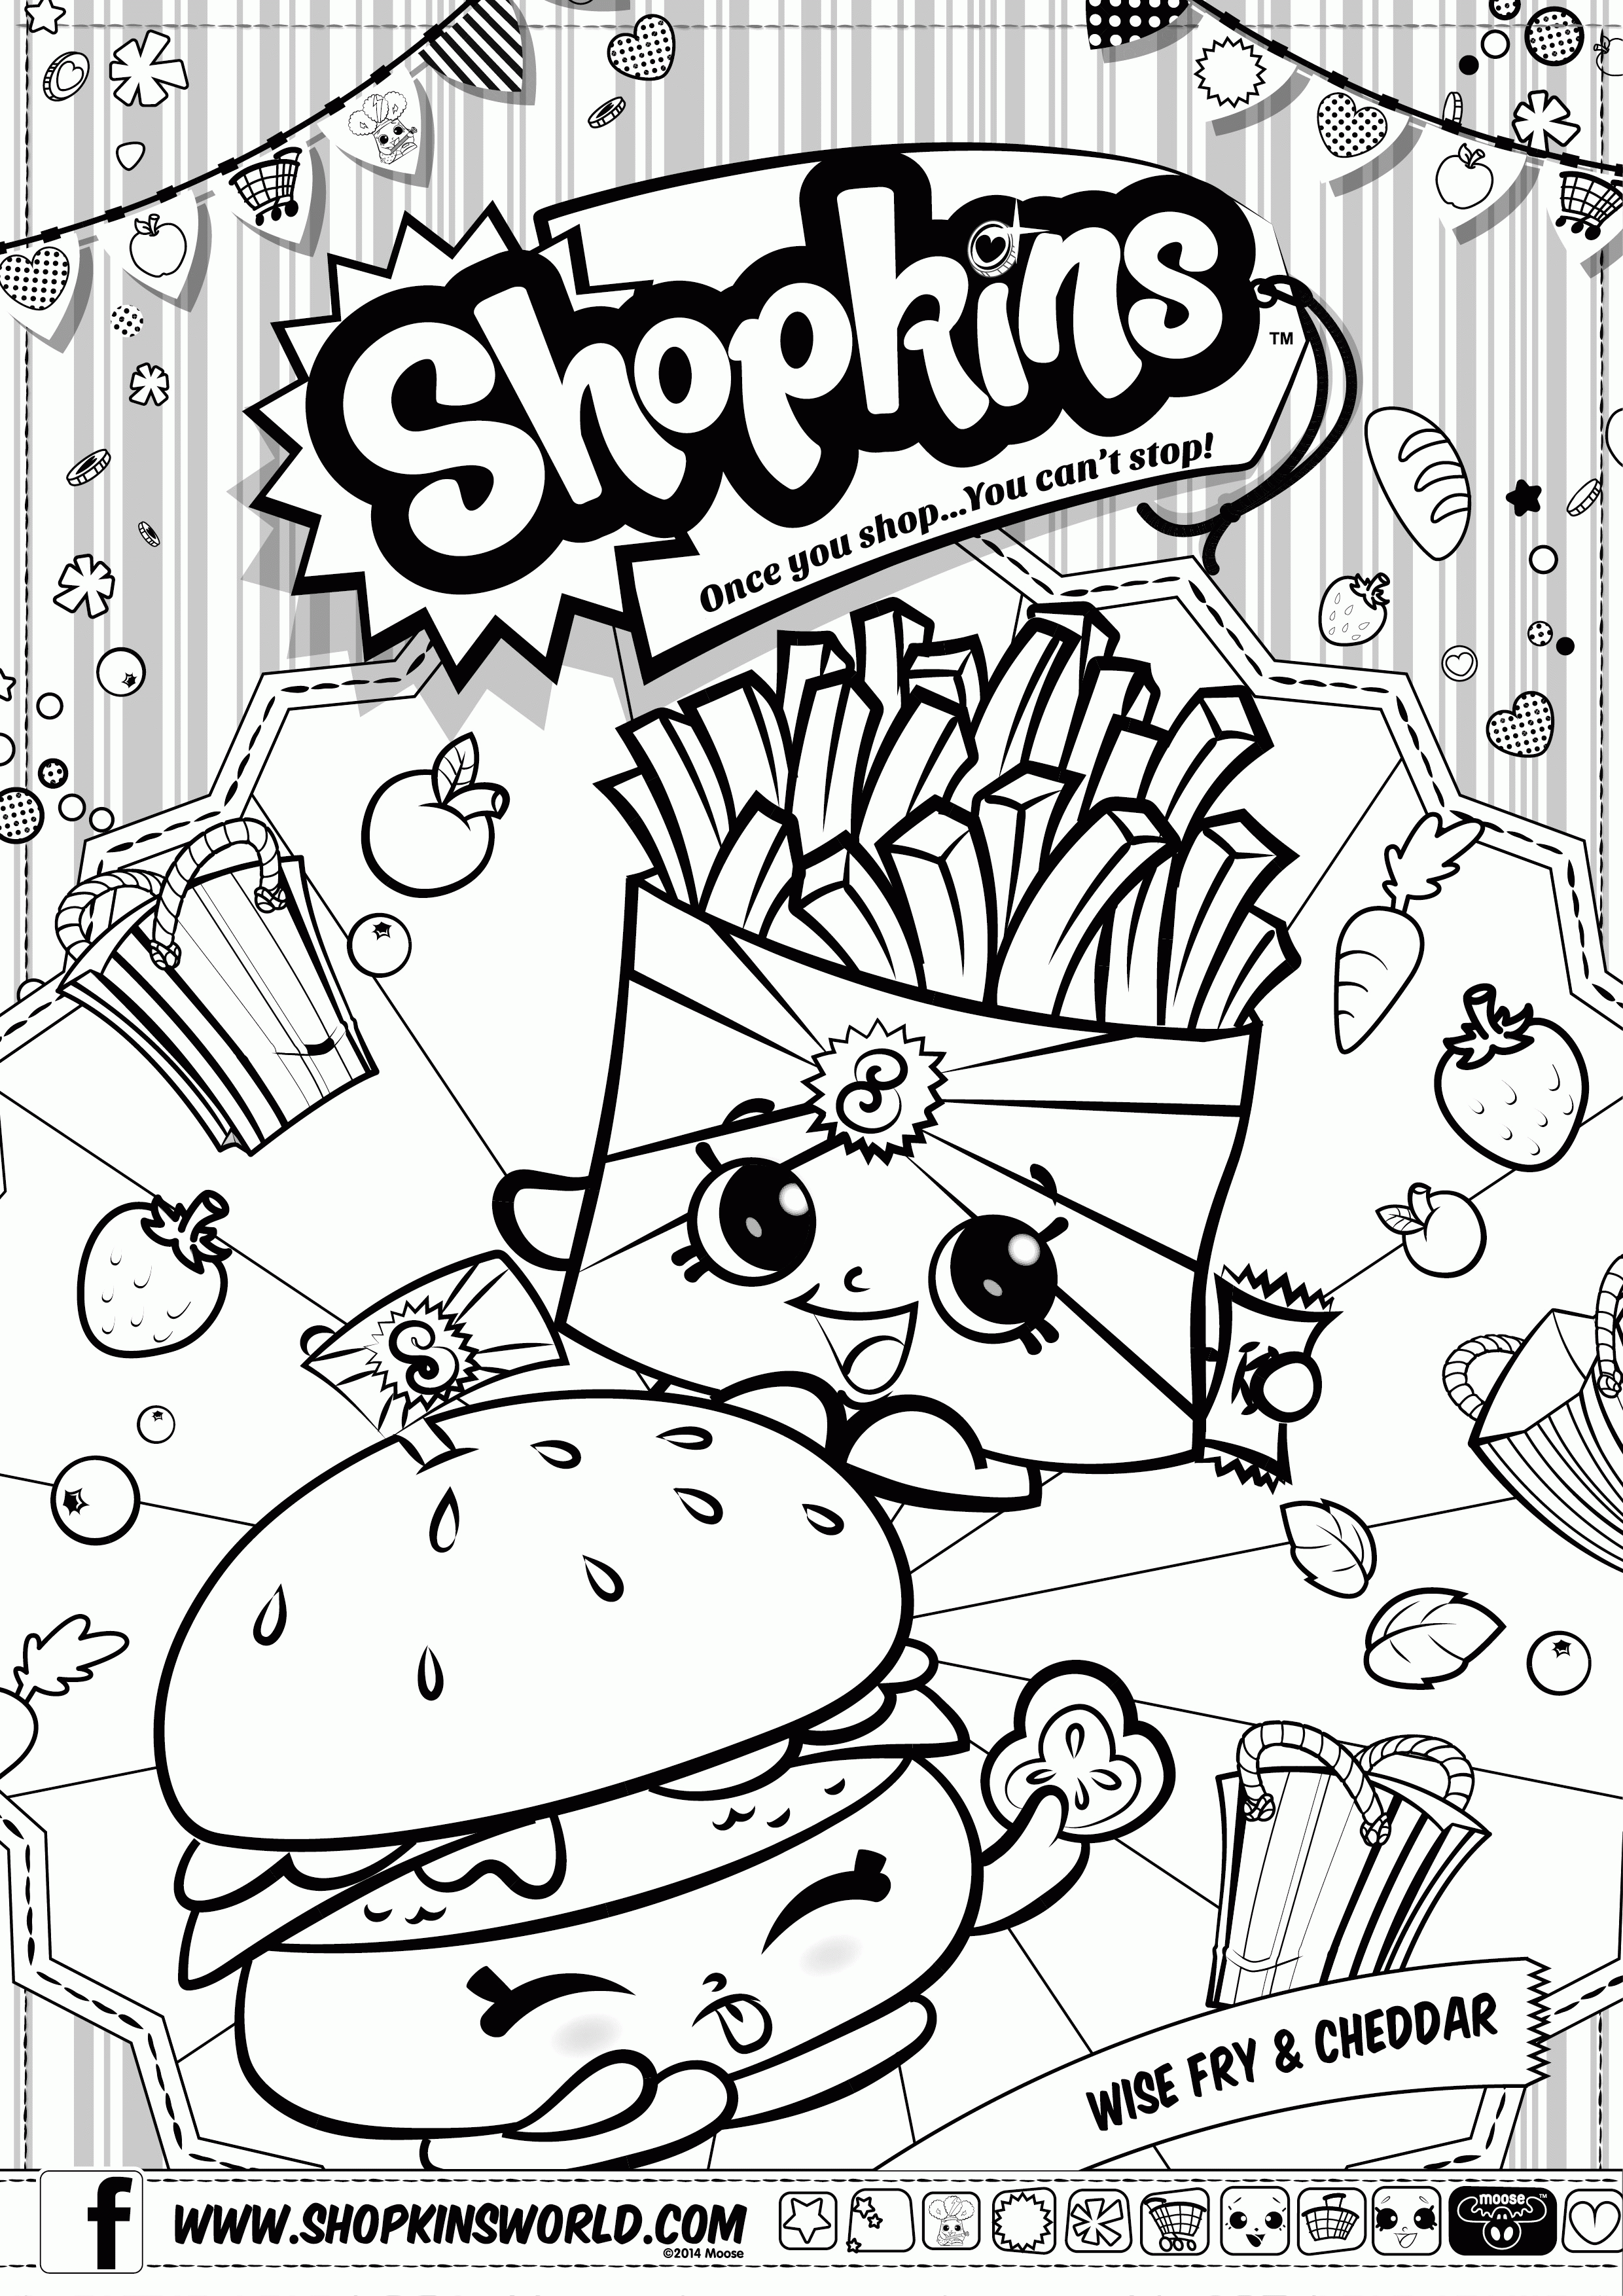 38 Printable Shopkins Coloring Pages To Print Coloring Pages For Kids